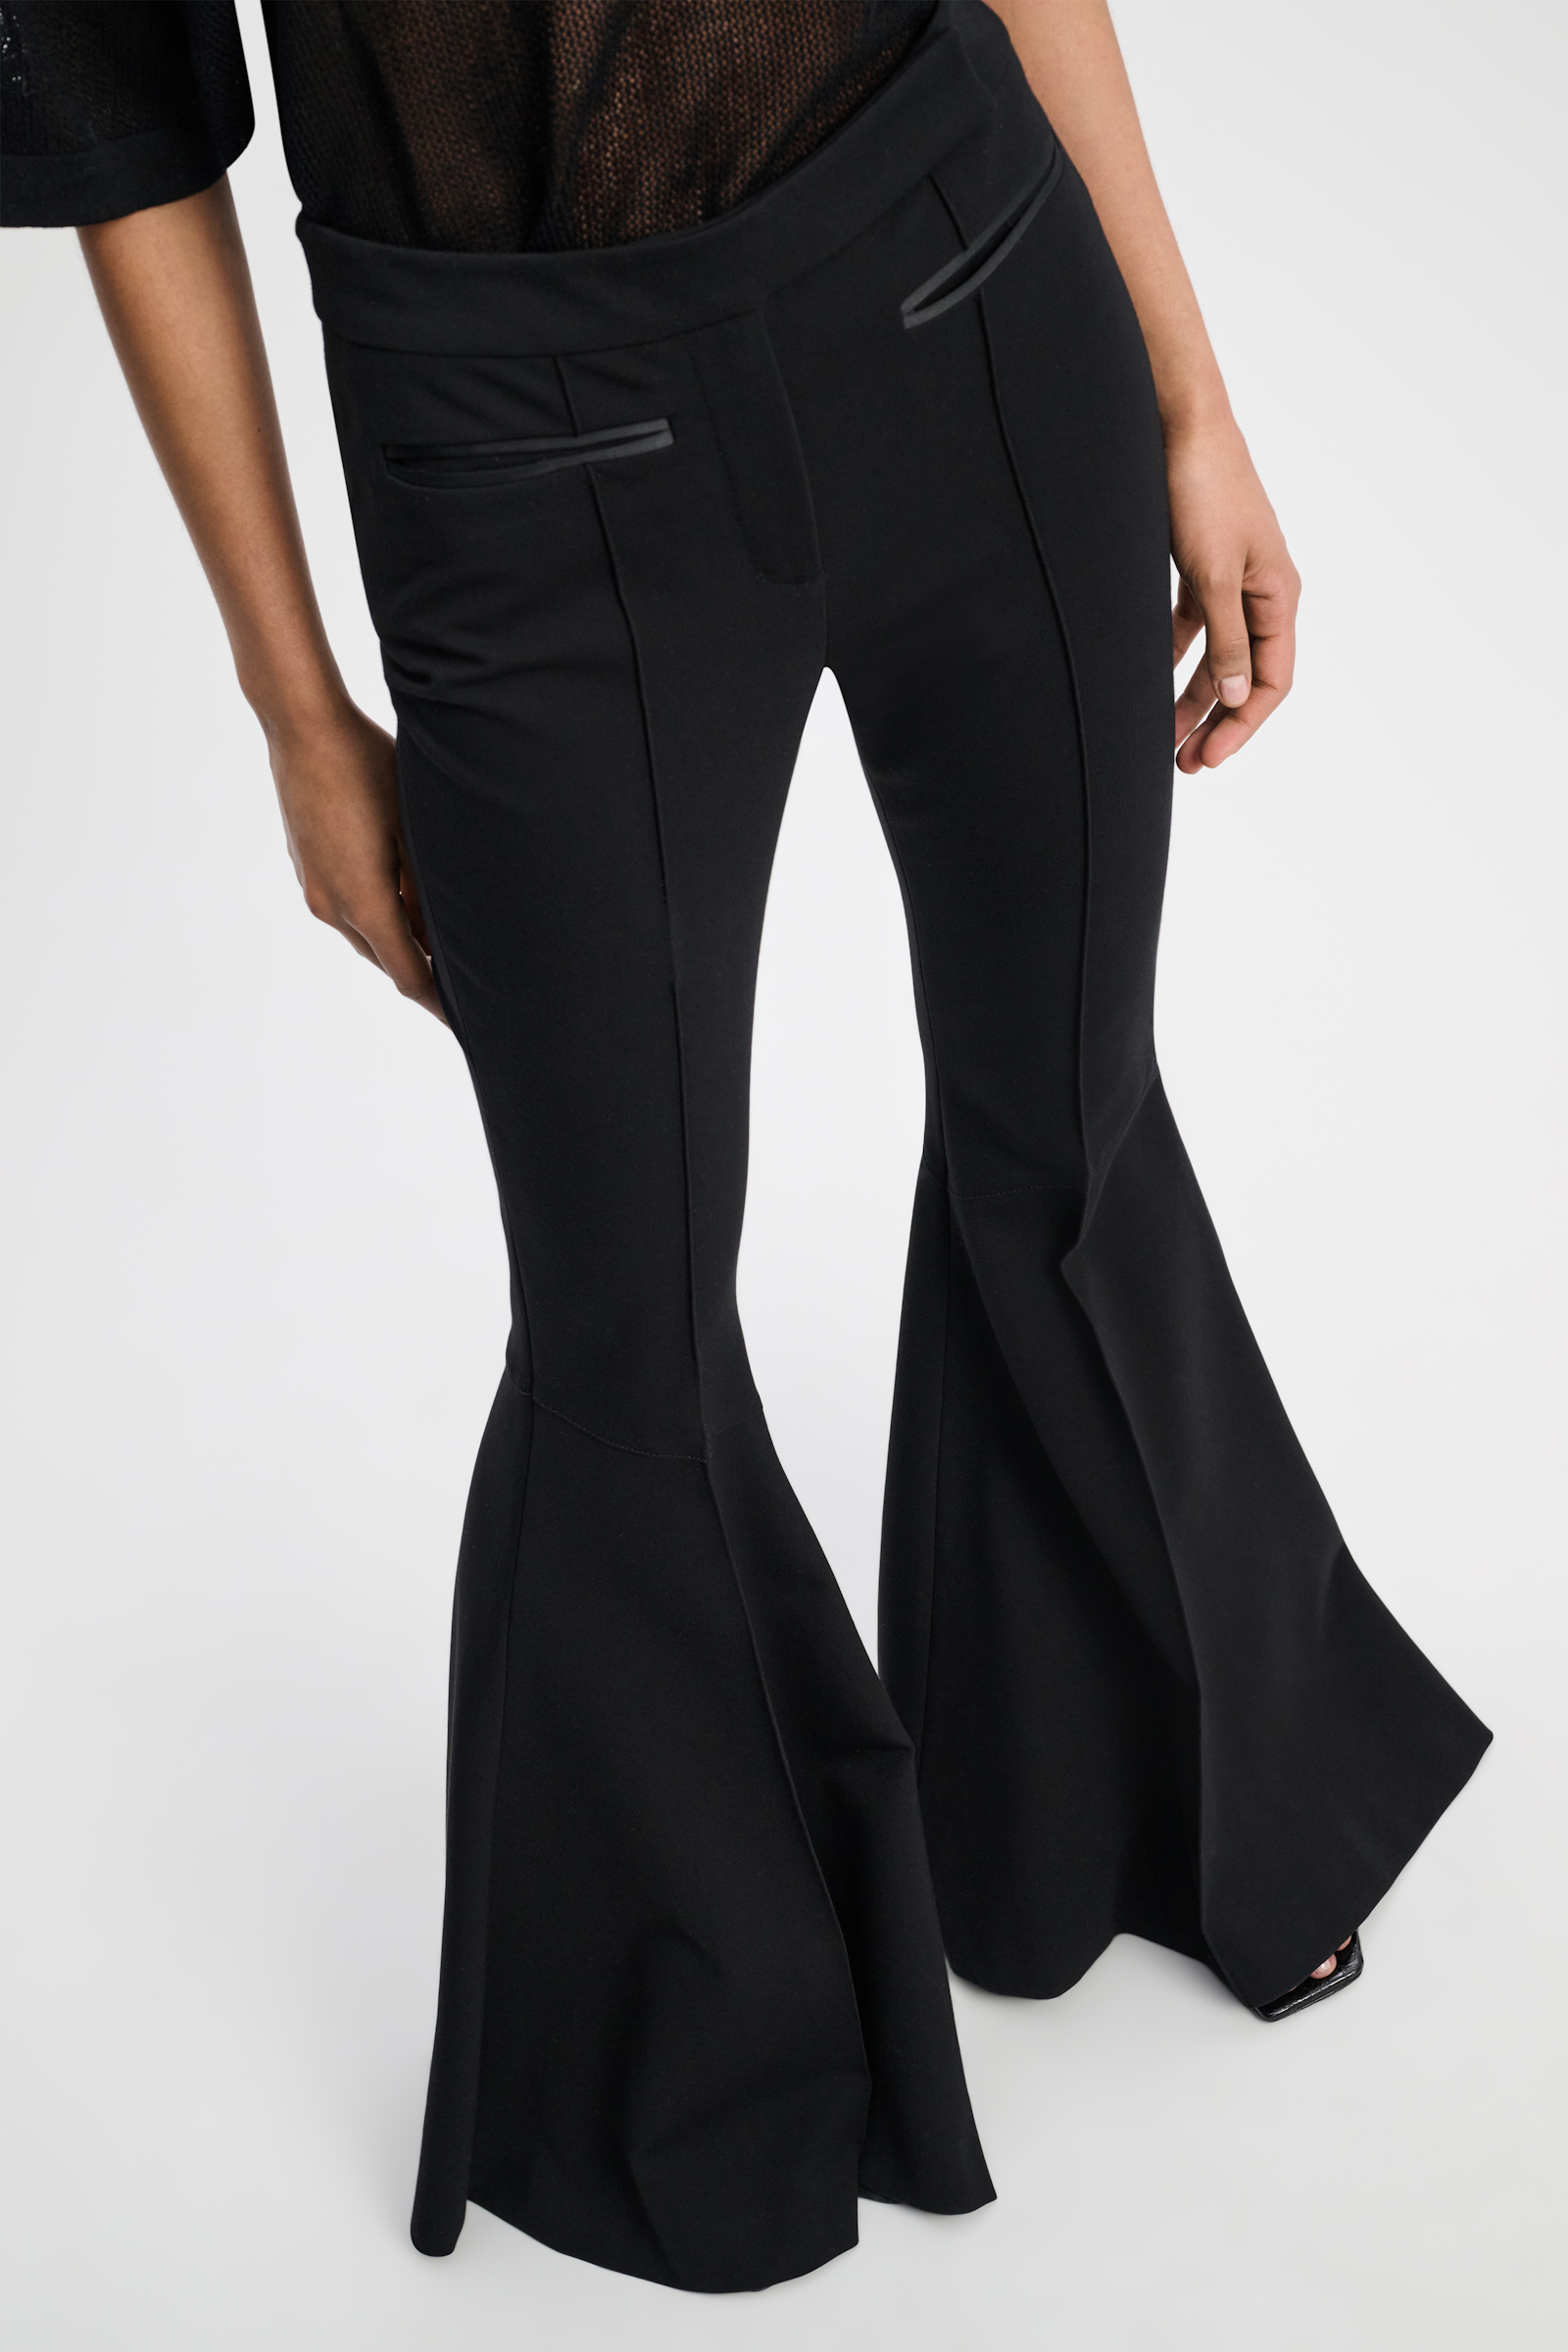 Dorothee Schumacher Flared wide leg pants in Punto Milano pure black